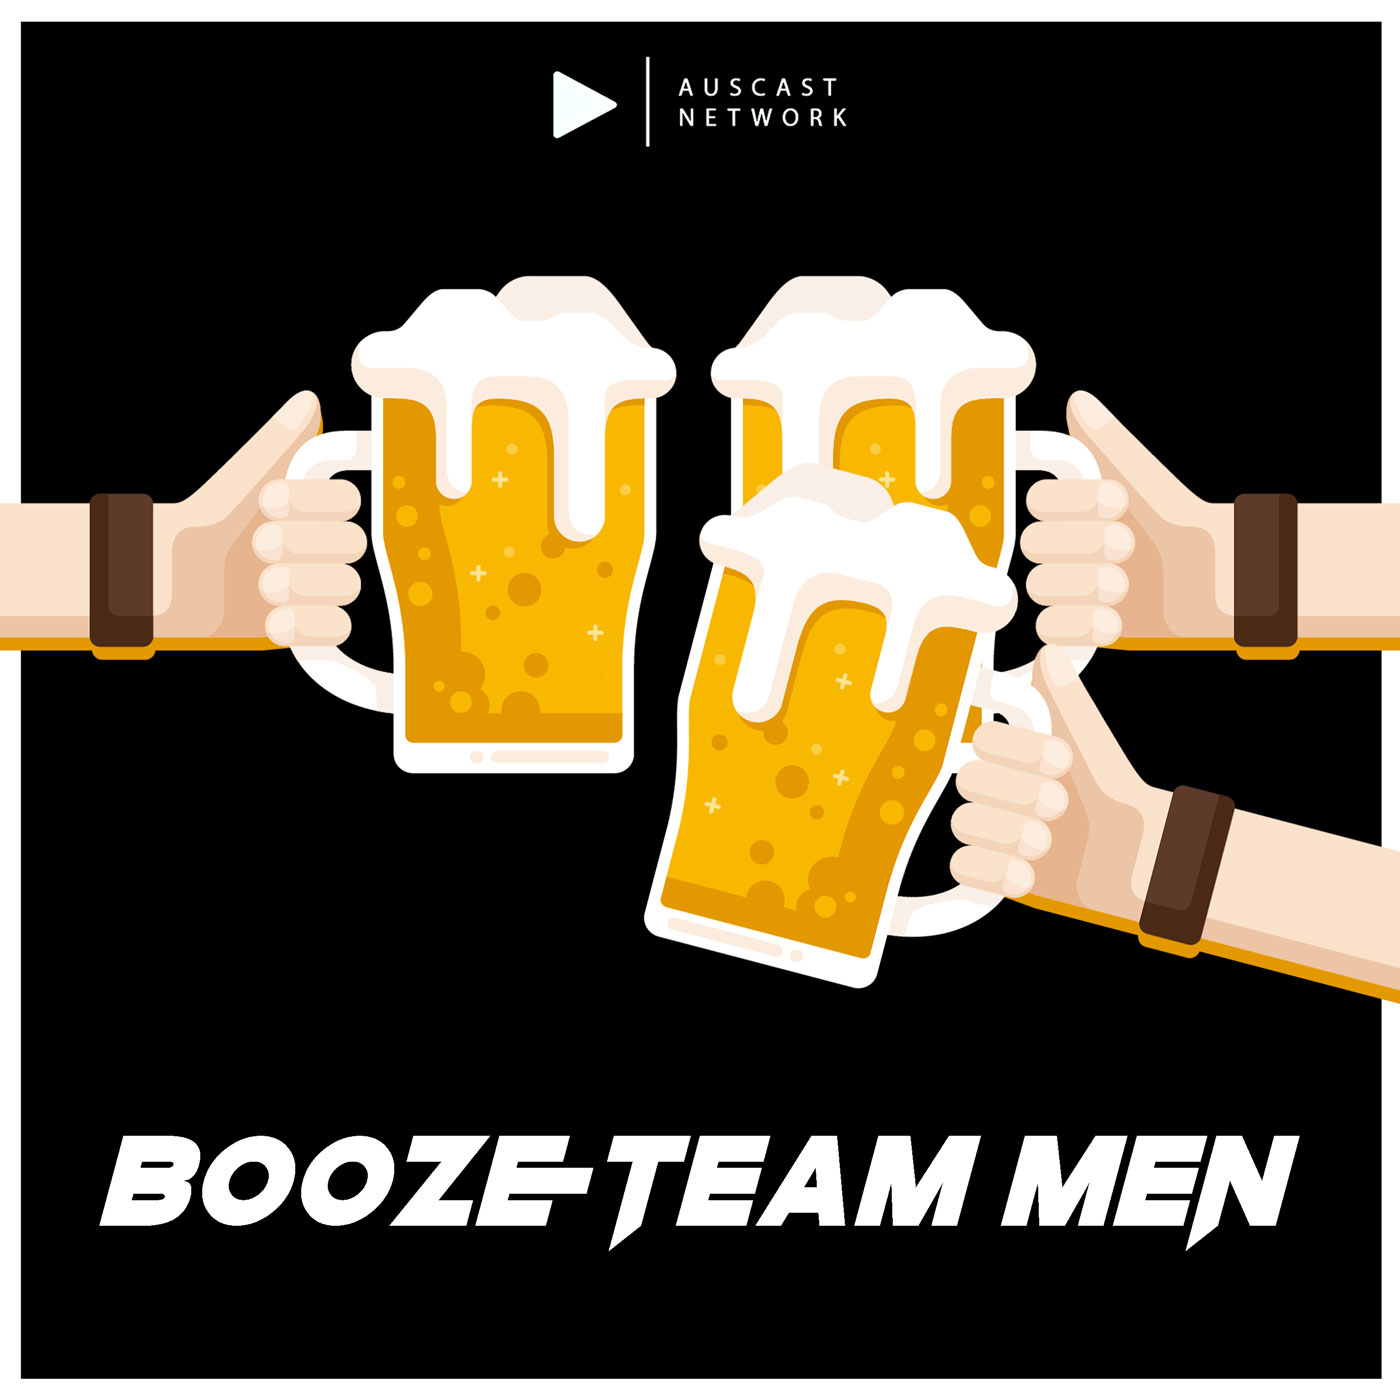 Booze Team Men - Pirate Life Prison Bar Ale, SA Dance Music Awards Shooting, Awkward moments on Radio, Craziest things seen at a nightclub